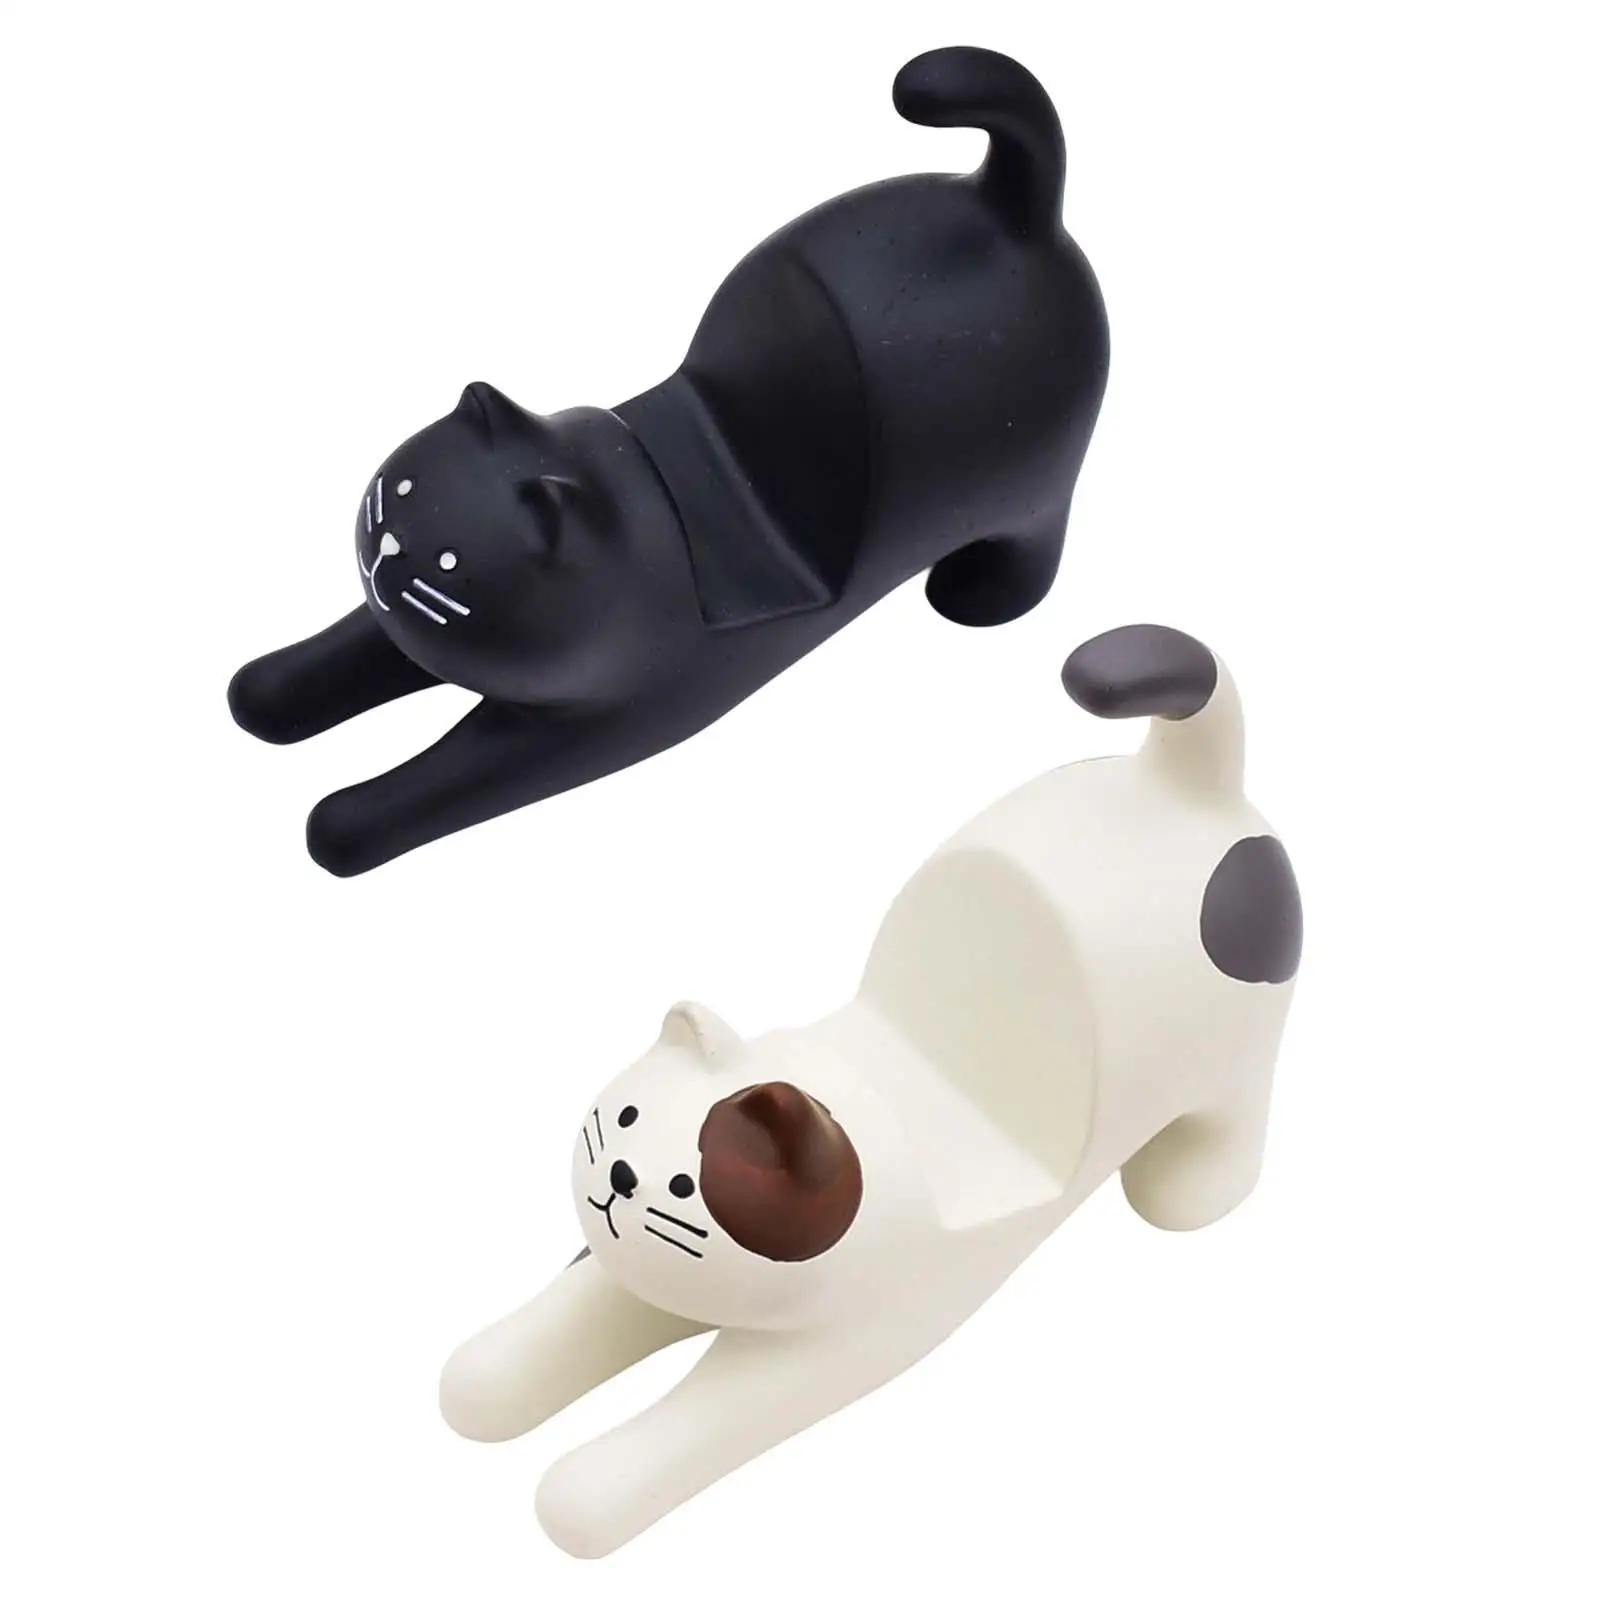 Creative Cat Cell Phone Stand Holder Table Decoration Crafts Tablet Stand for Desk Support Cradle Dock Gifts Animal Kitty